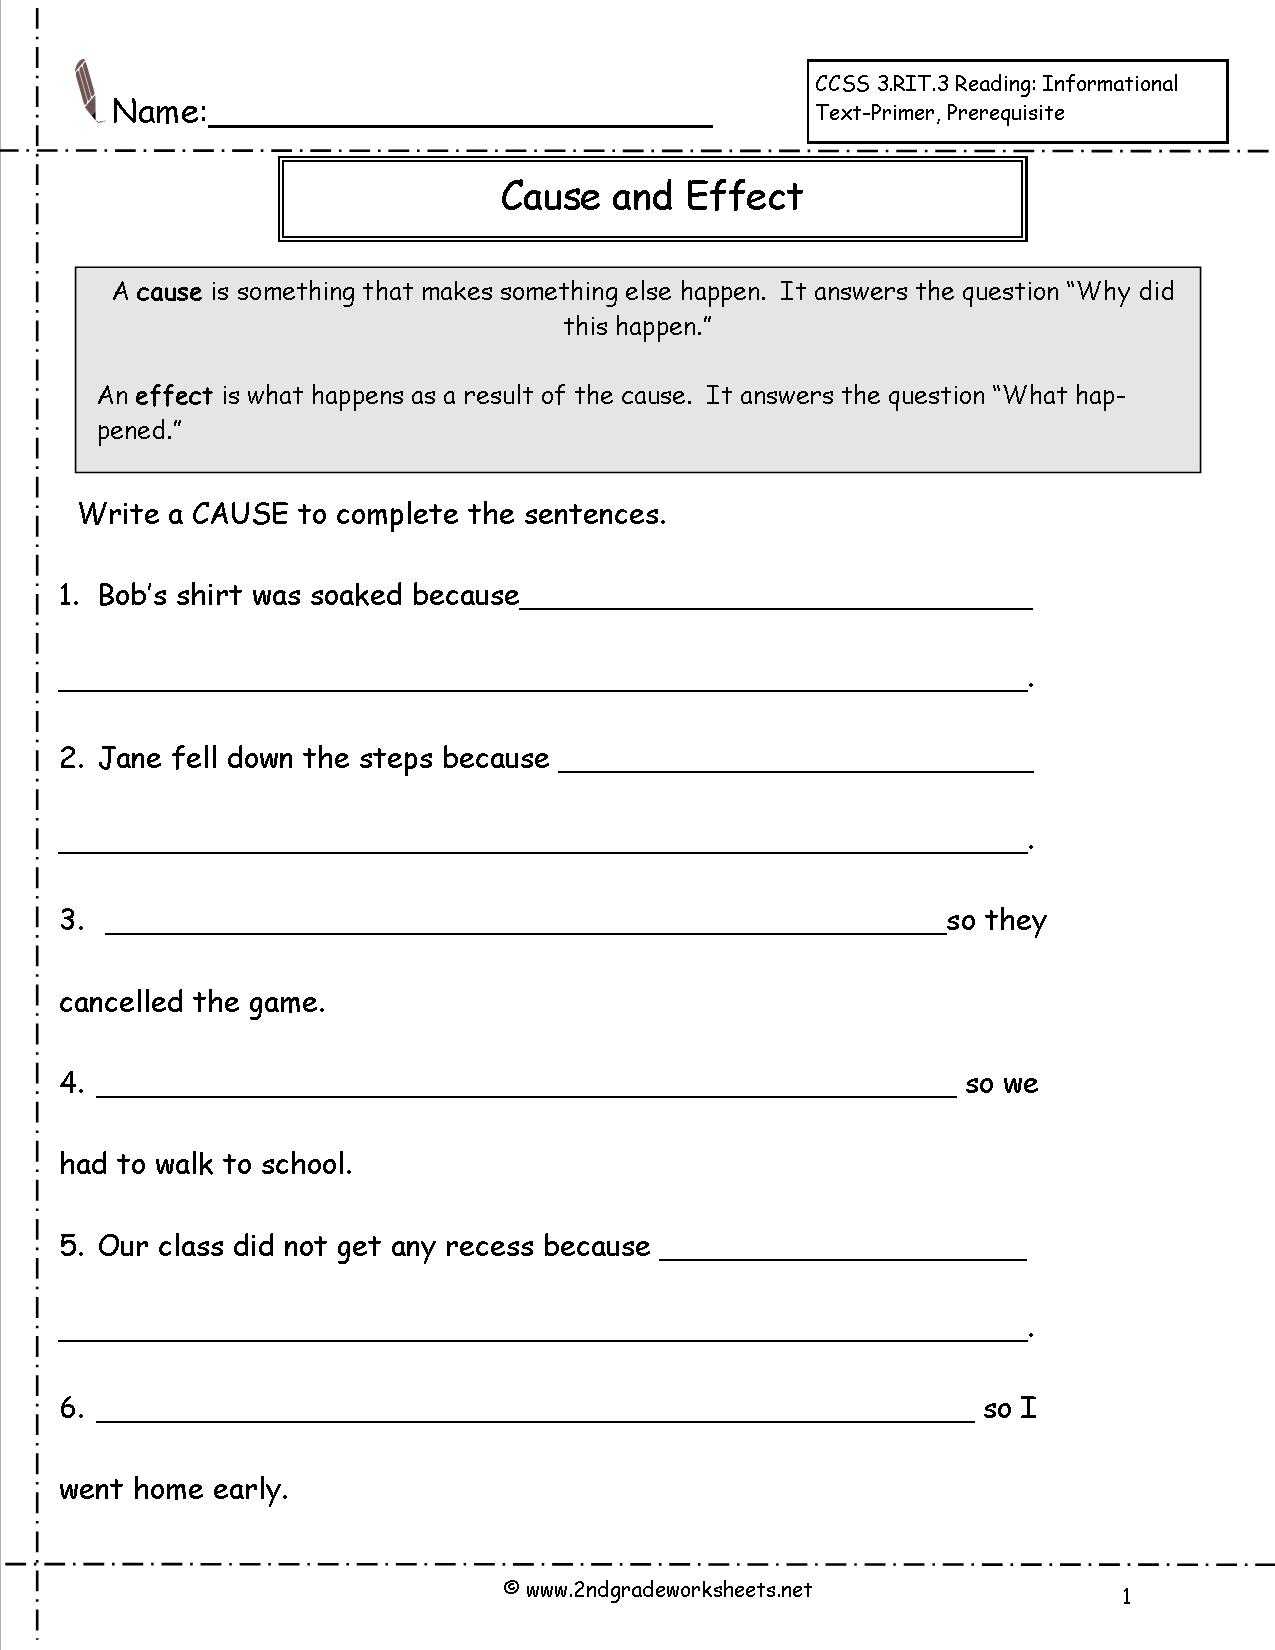 Cause and Effect Worksheets 2nd Grade with Cause and Effect Worksheets 4th Grade Worksheet Math for Kids